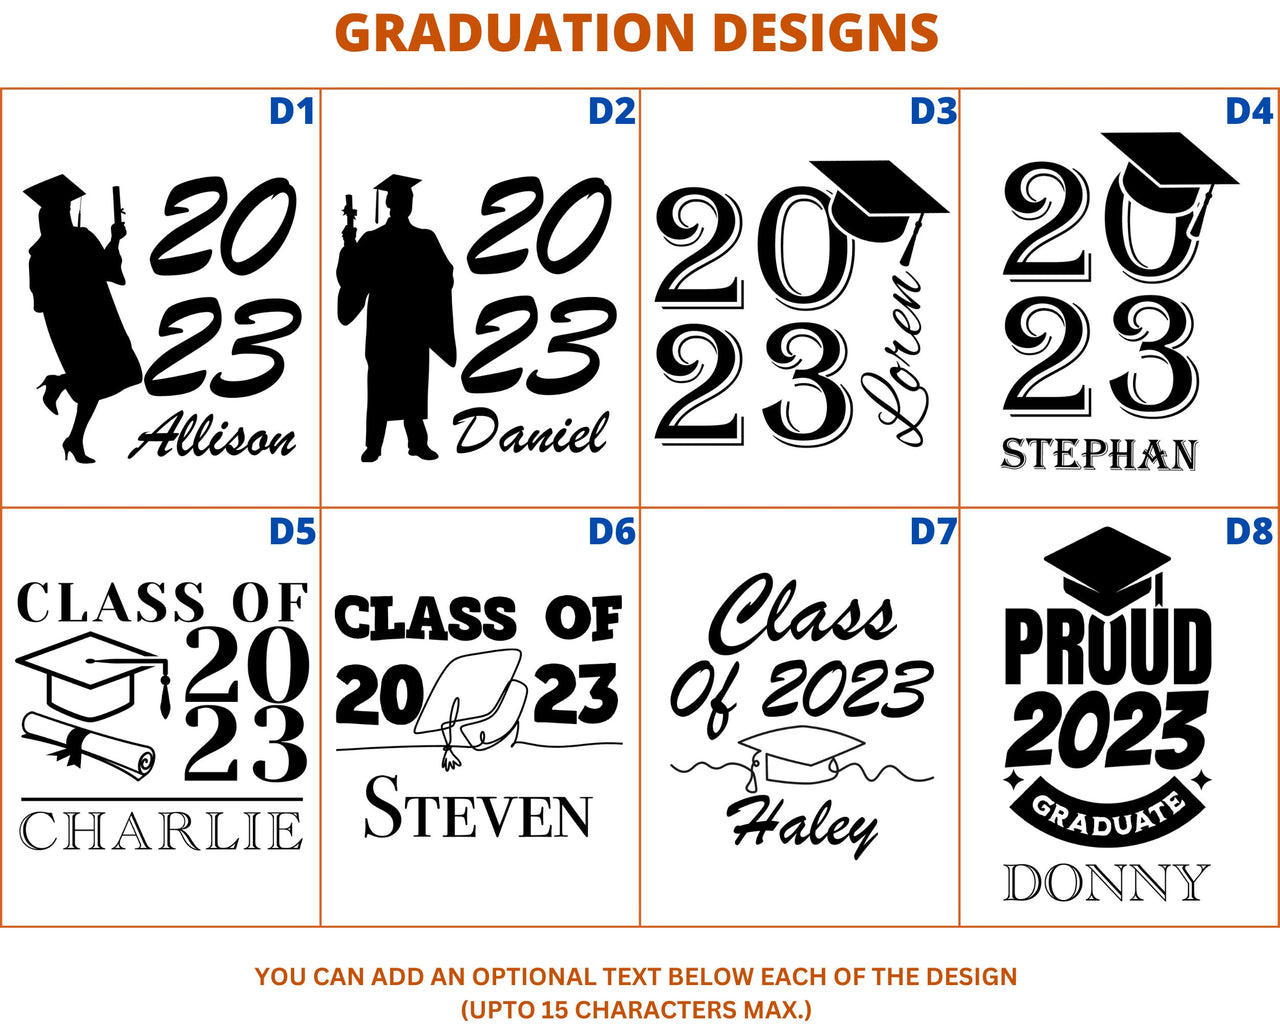 Custom Pint Glass Graduation Gift, Personalized Name/Text Beer Glass Gift for Class of 2023 Graduate, Grad Gift for Son, Daughter Graduation